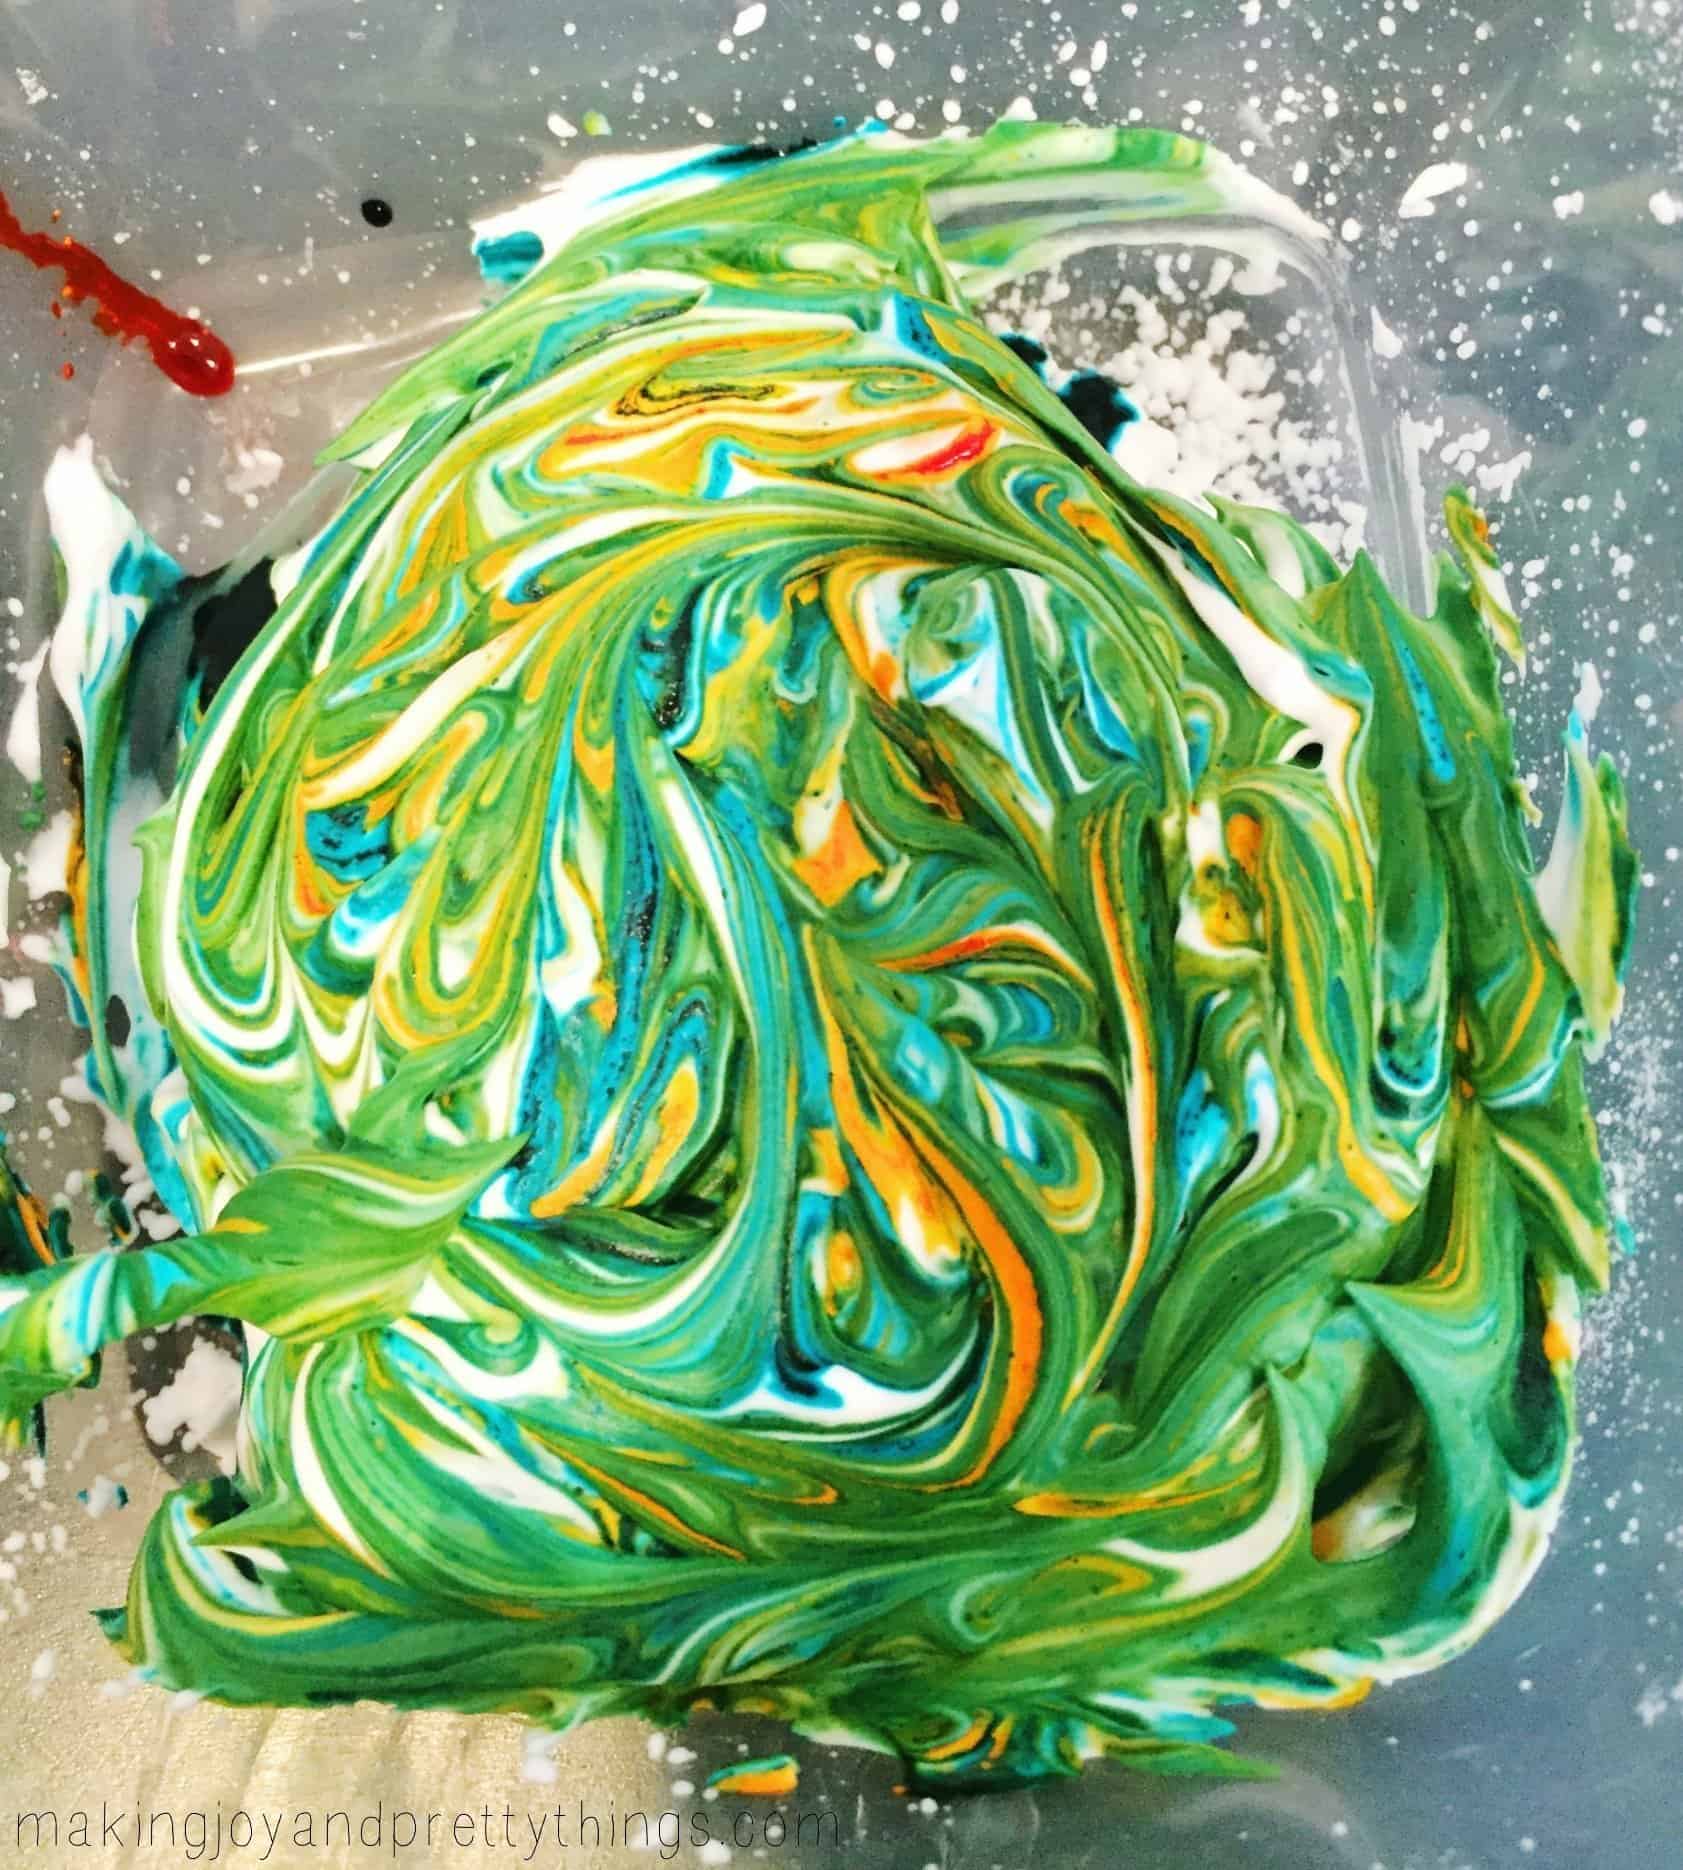 A glass container is filled with a mixture of colored shaving cream. The mixture is a swirl of green, yellow, and blue food coloring.